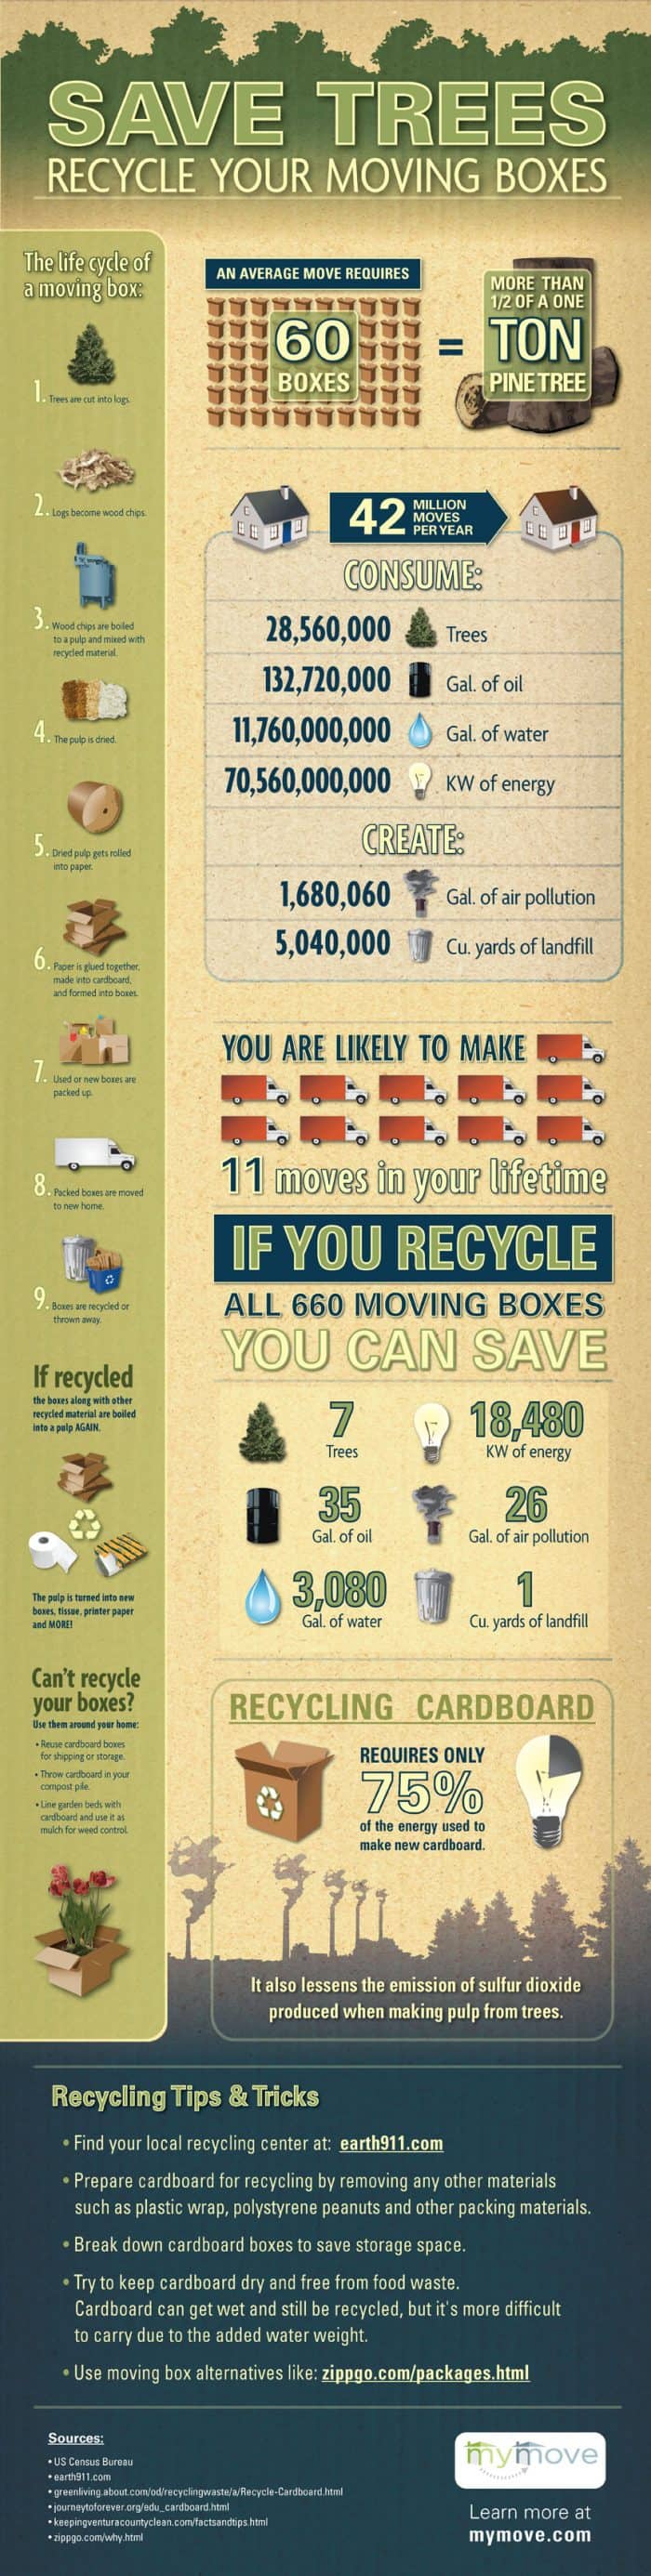 Save Trees Recycle Your Moving Boxes Infographic